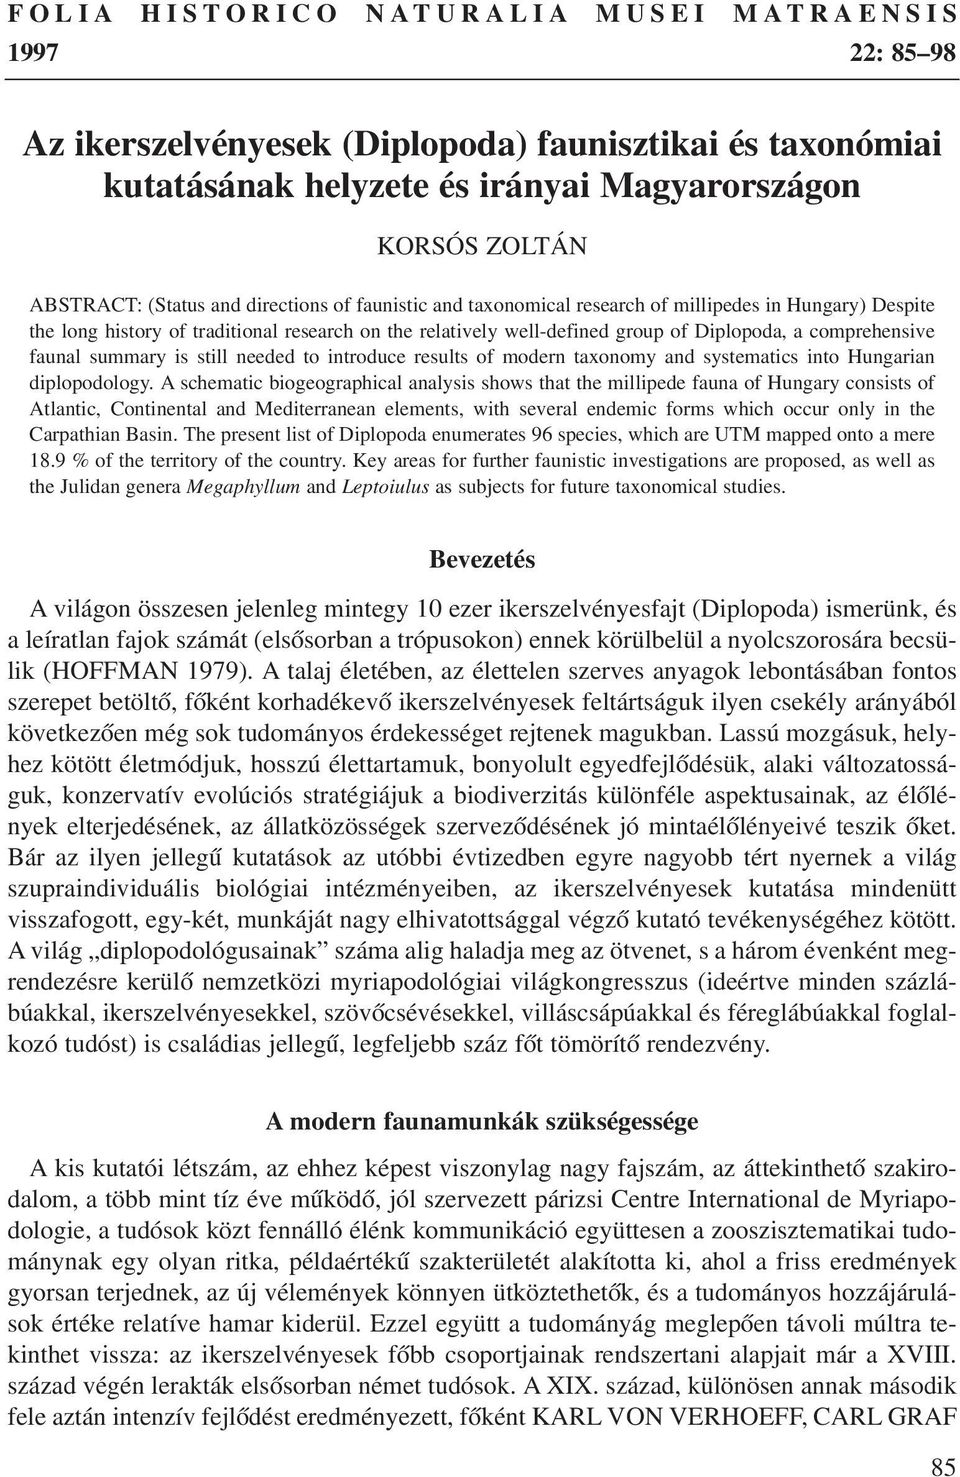 summary is still needed to introduce results of modern taxonomy and systematics into Hungarian diplopodology.